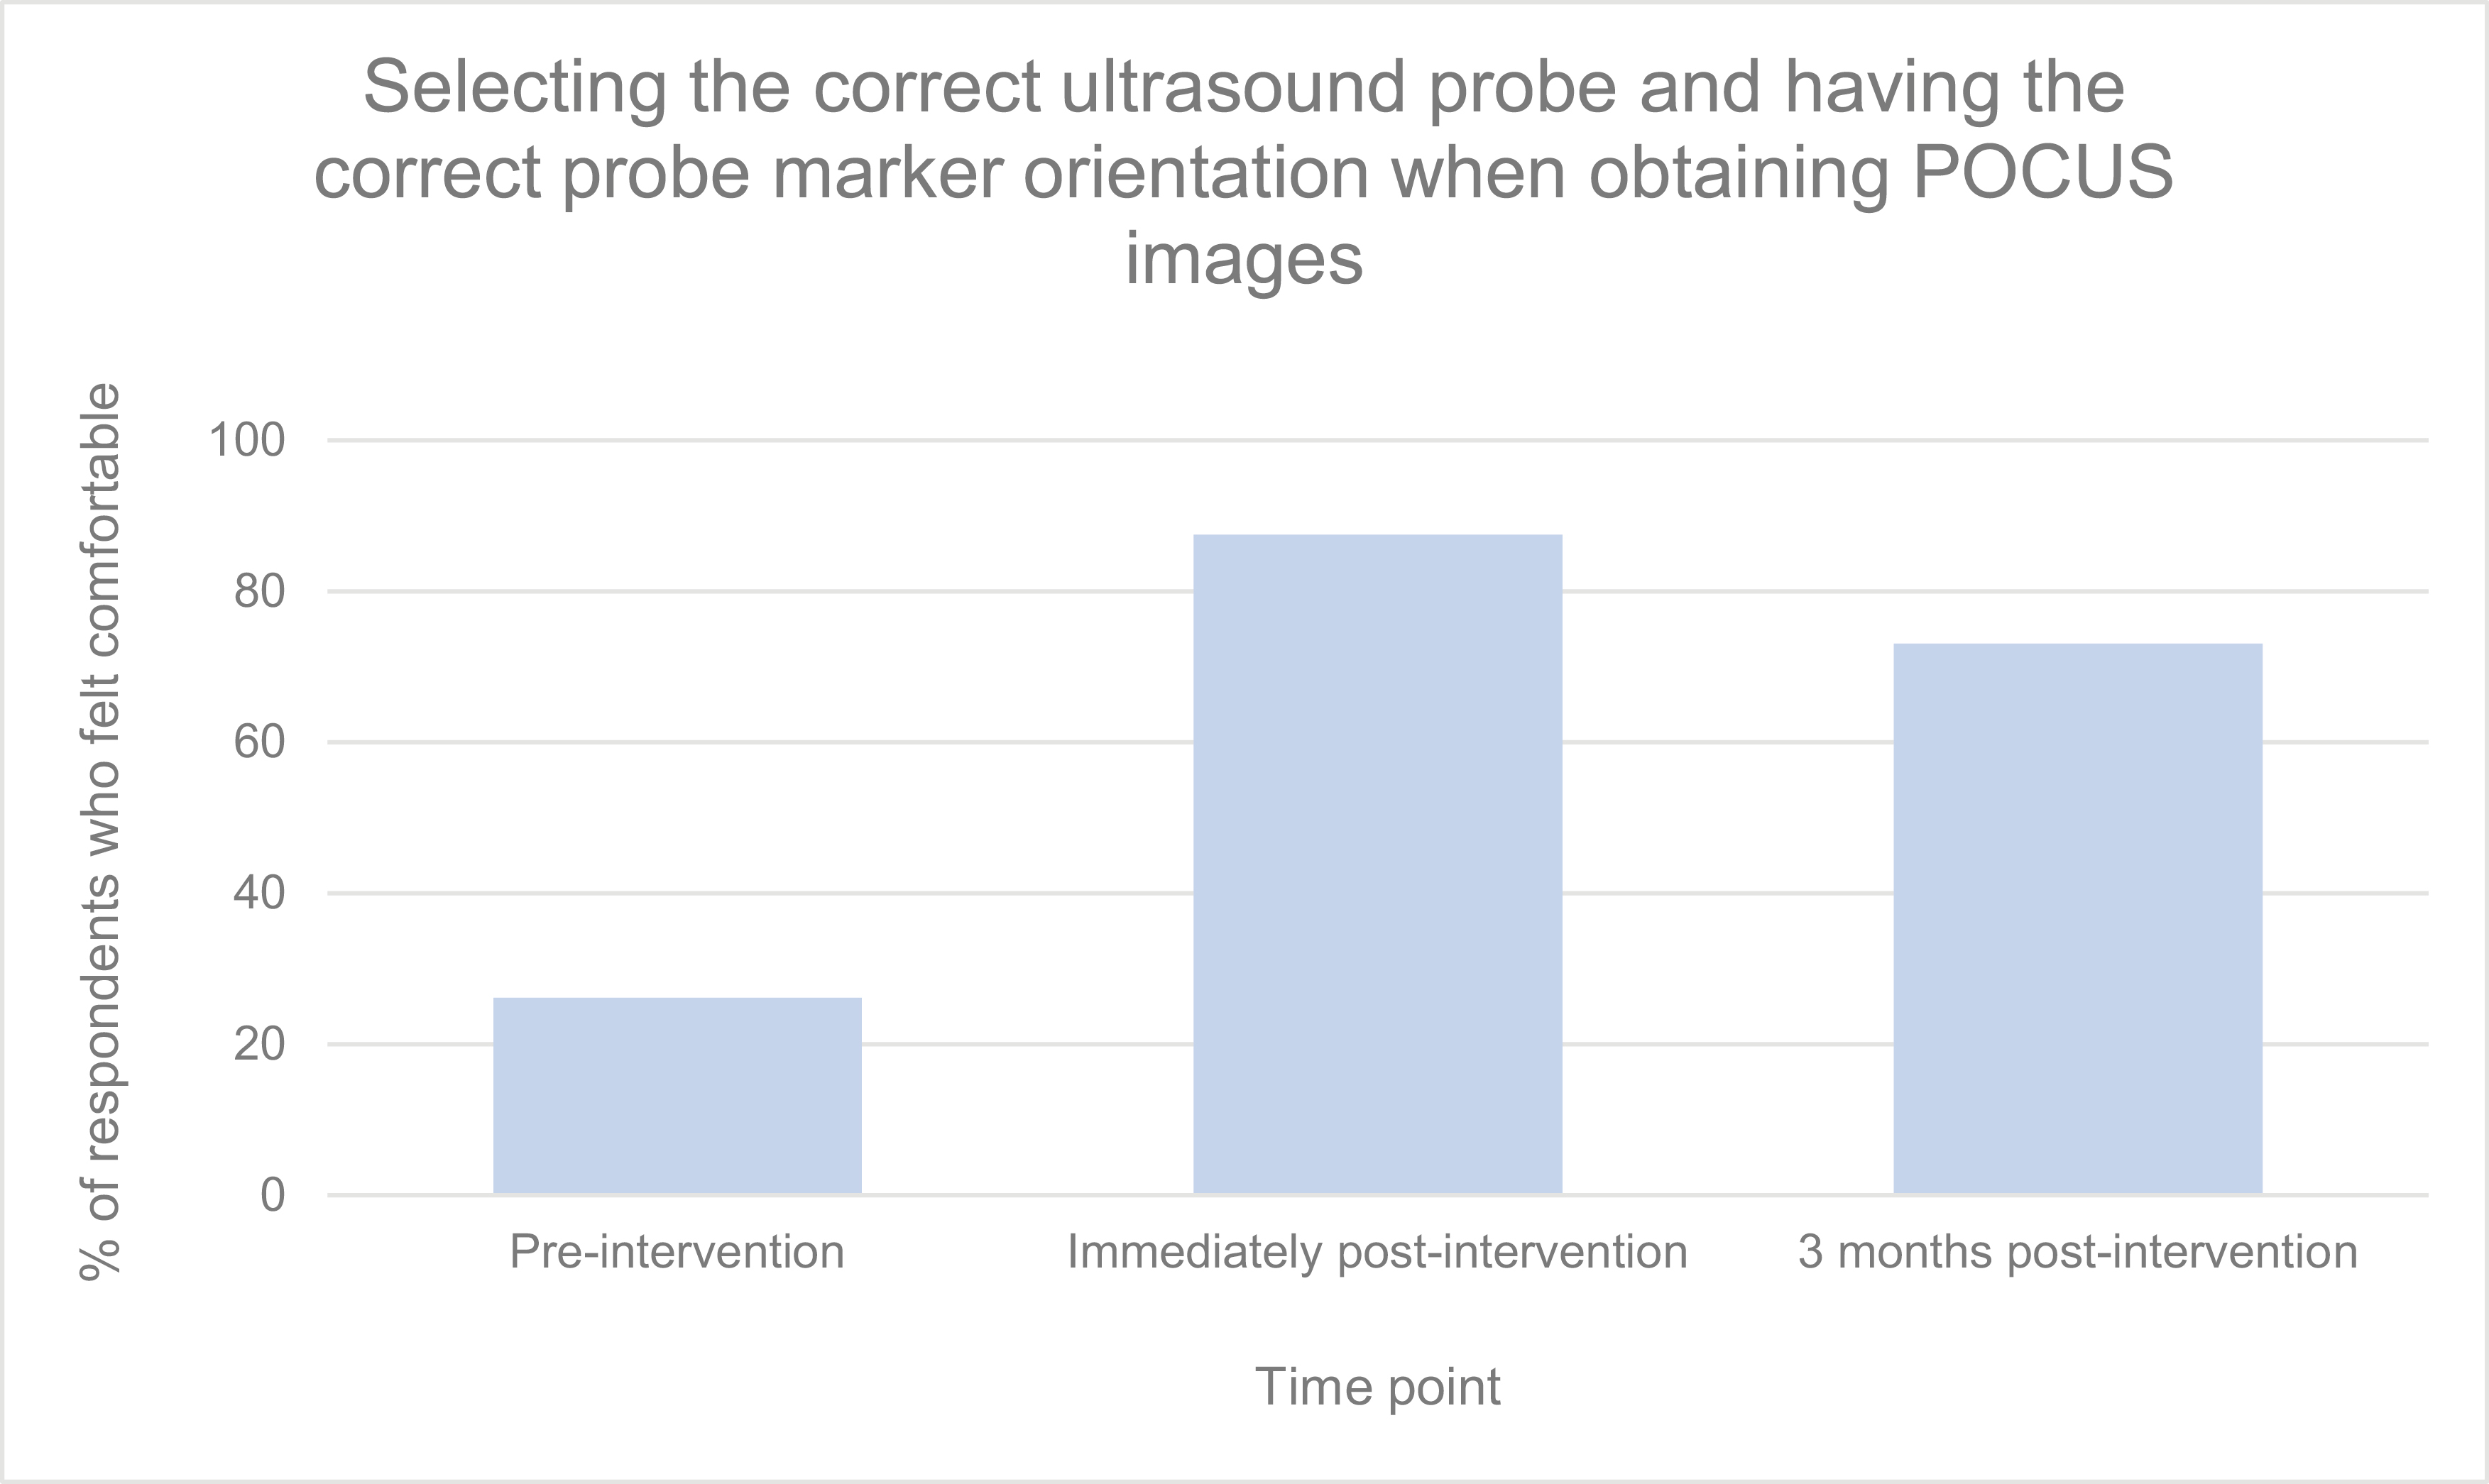 Percentage of respondents who felt comfortable selecting the correct ultrasound probe and orienting it correctly when obtaining POCUS images at each time point